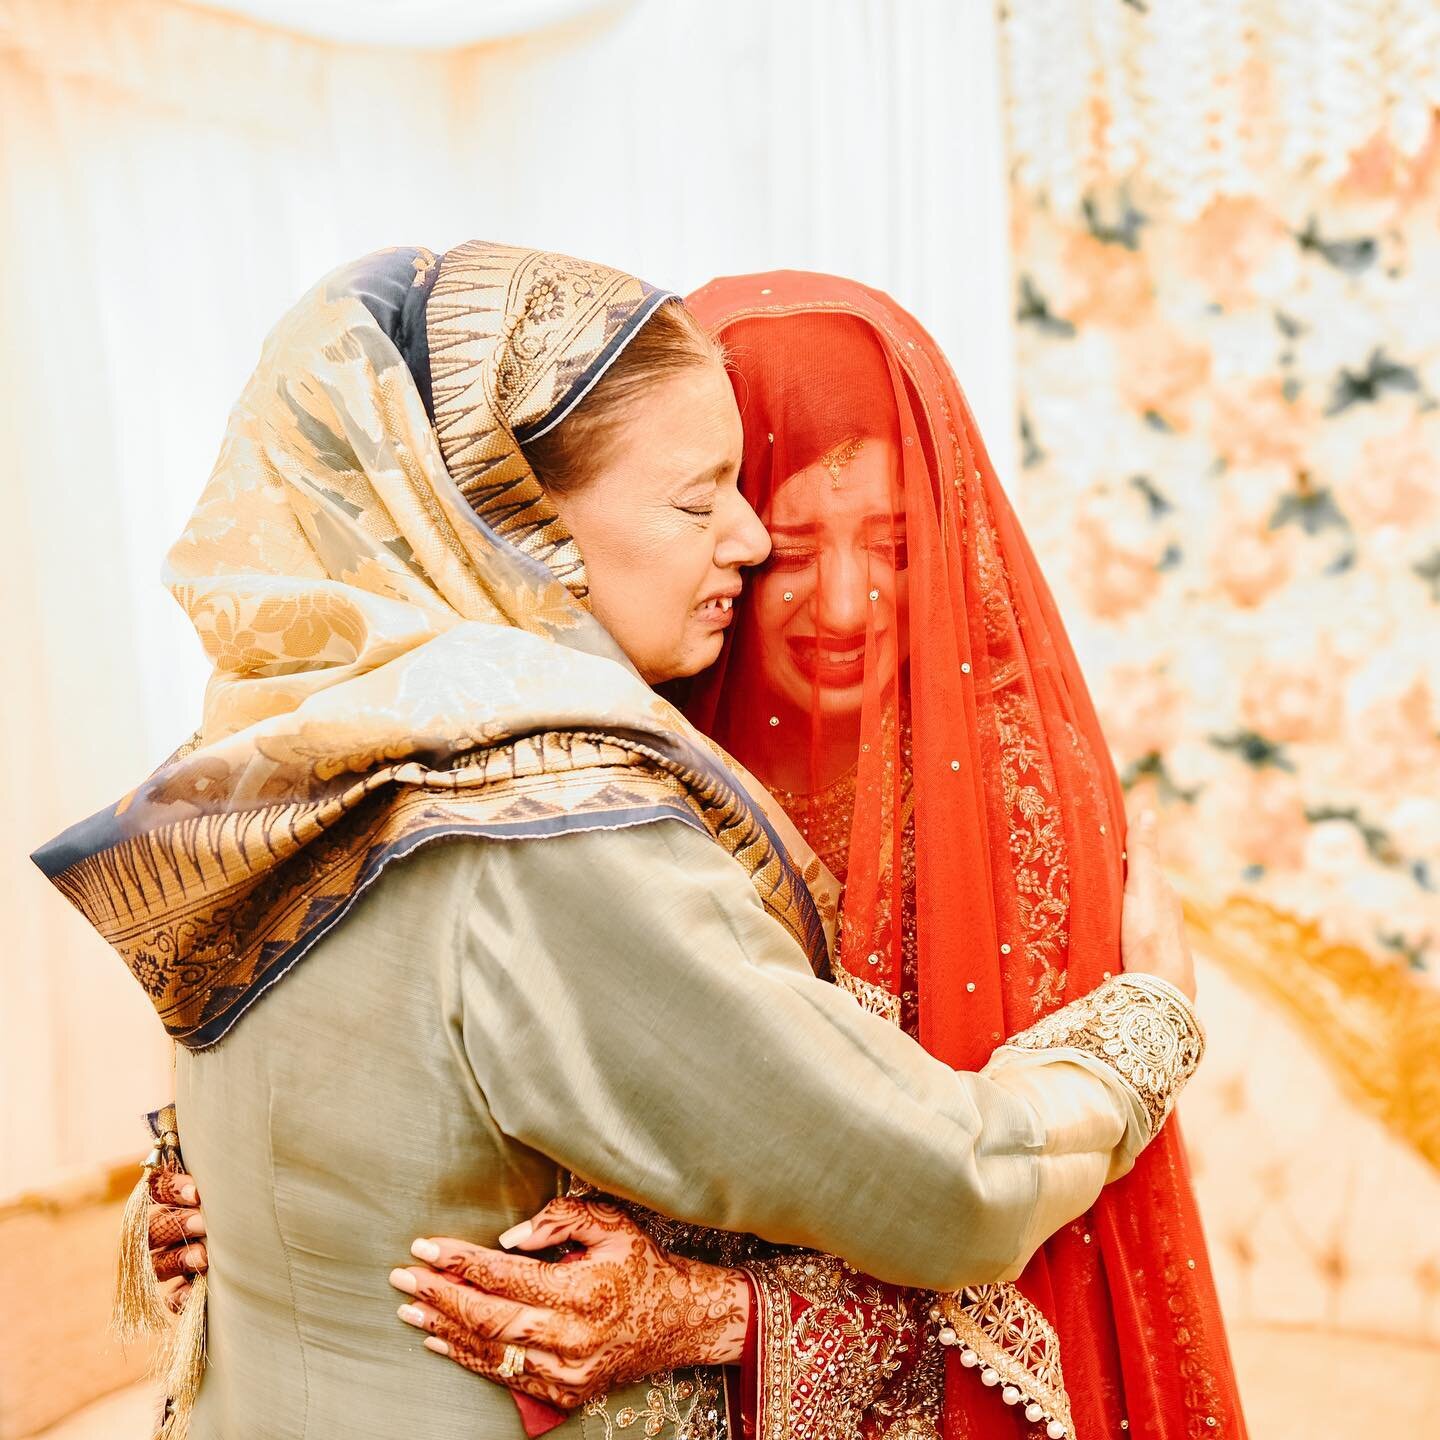 No love like a mother&rsquo;s love ❤️
Rukhsatis always get me emotional not just while covering them on the day but even afterwards while editing and going through images..I always think back to my own Rukhsati and although on my wedding day it dint 